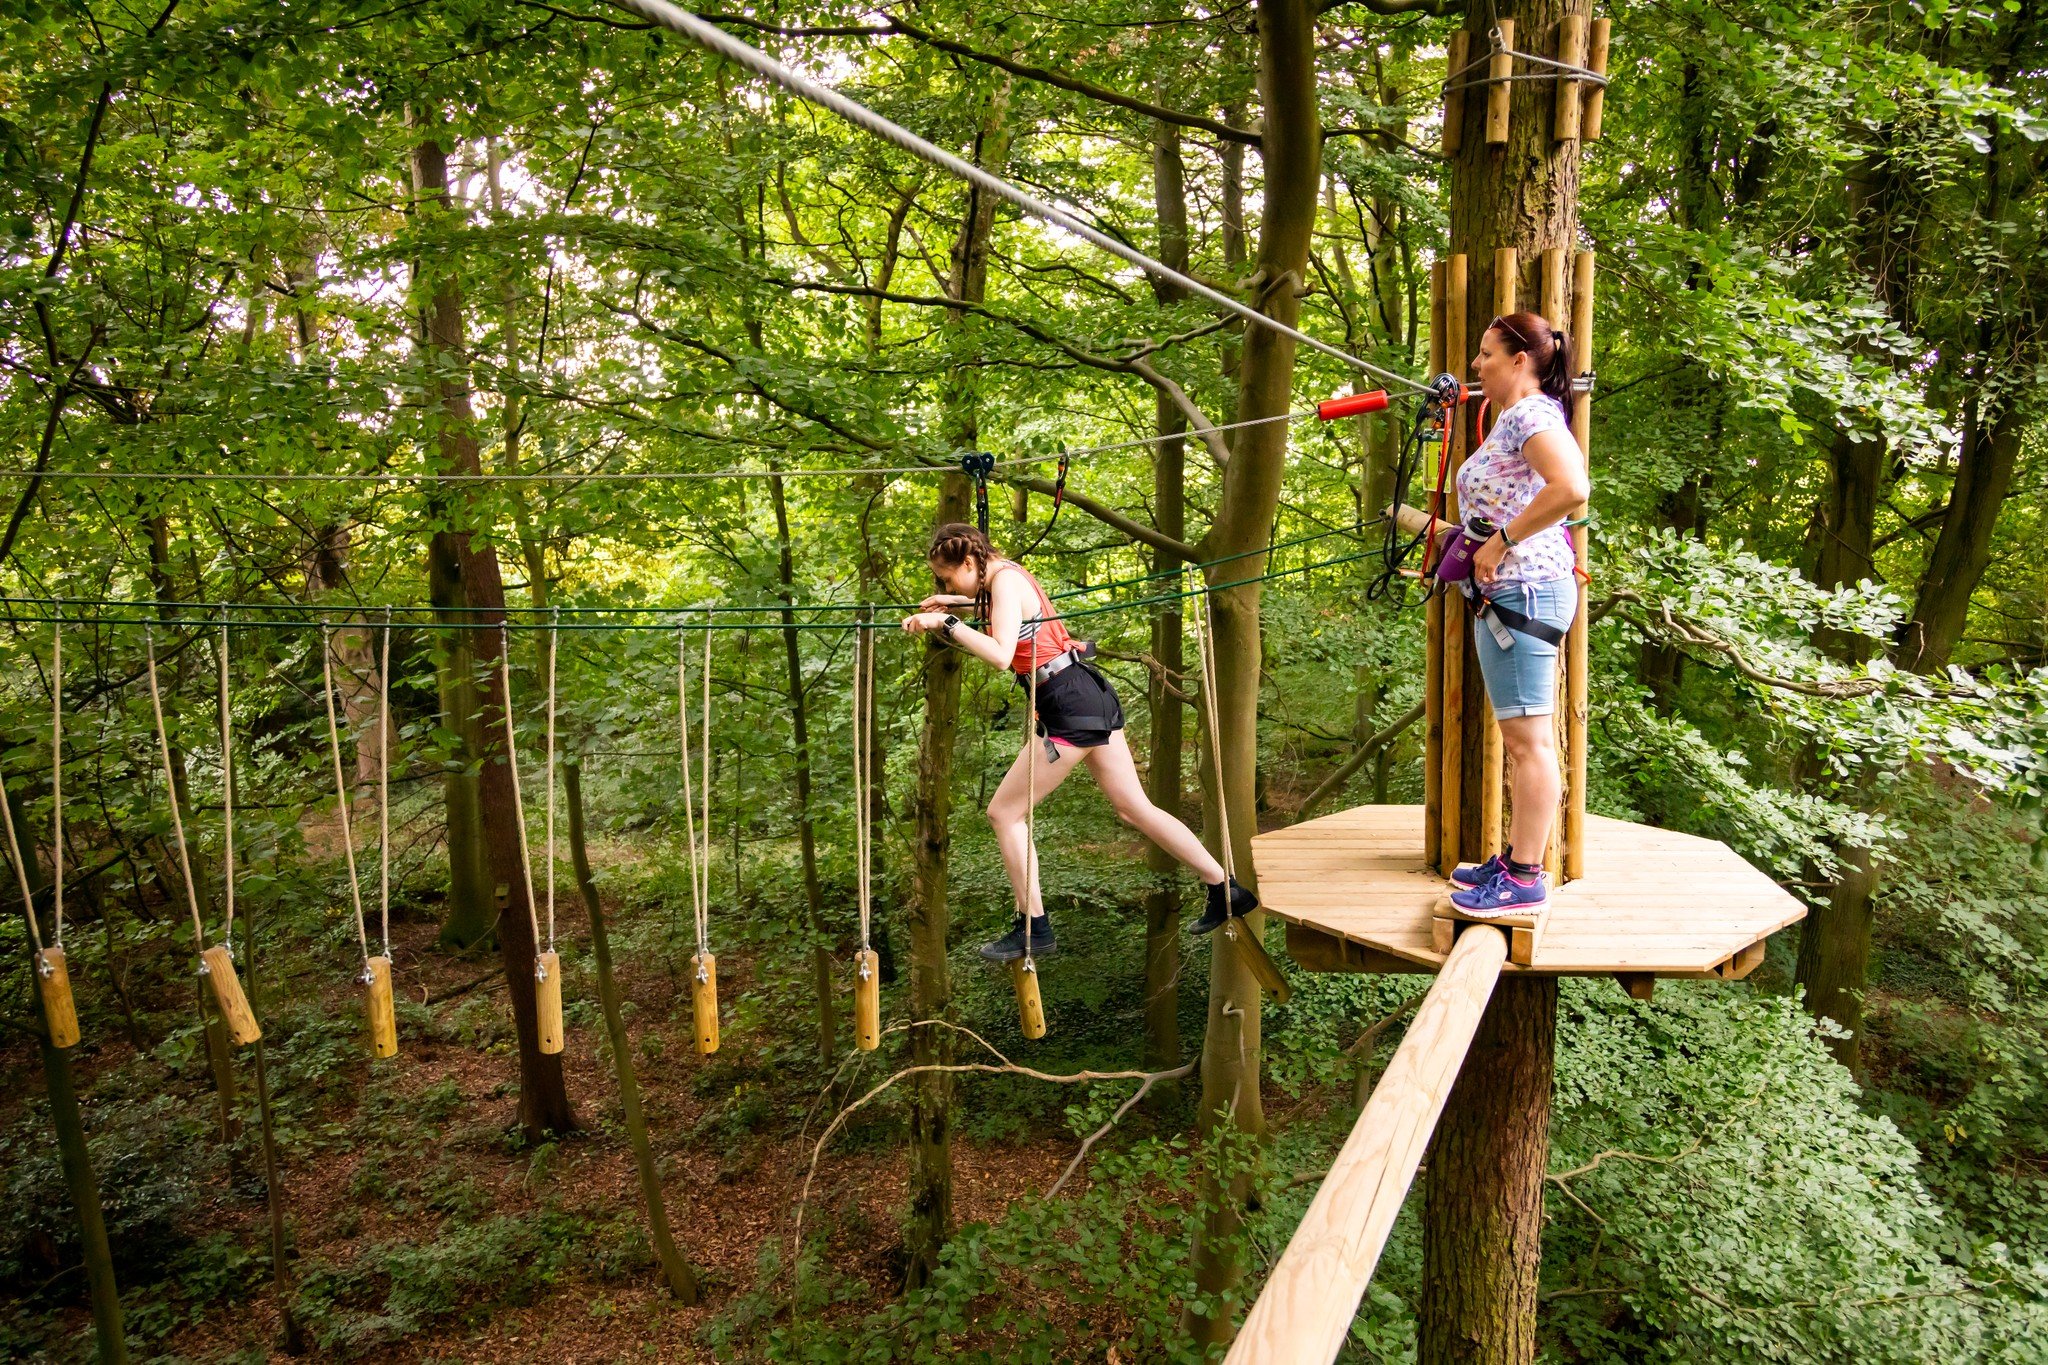 Go Ape’s new Salcey Forest location is now open